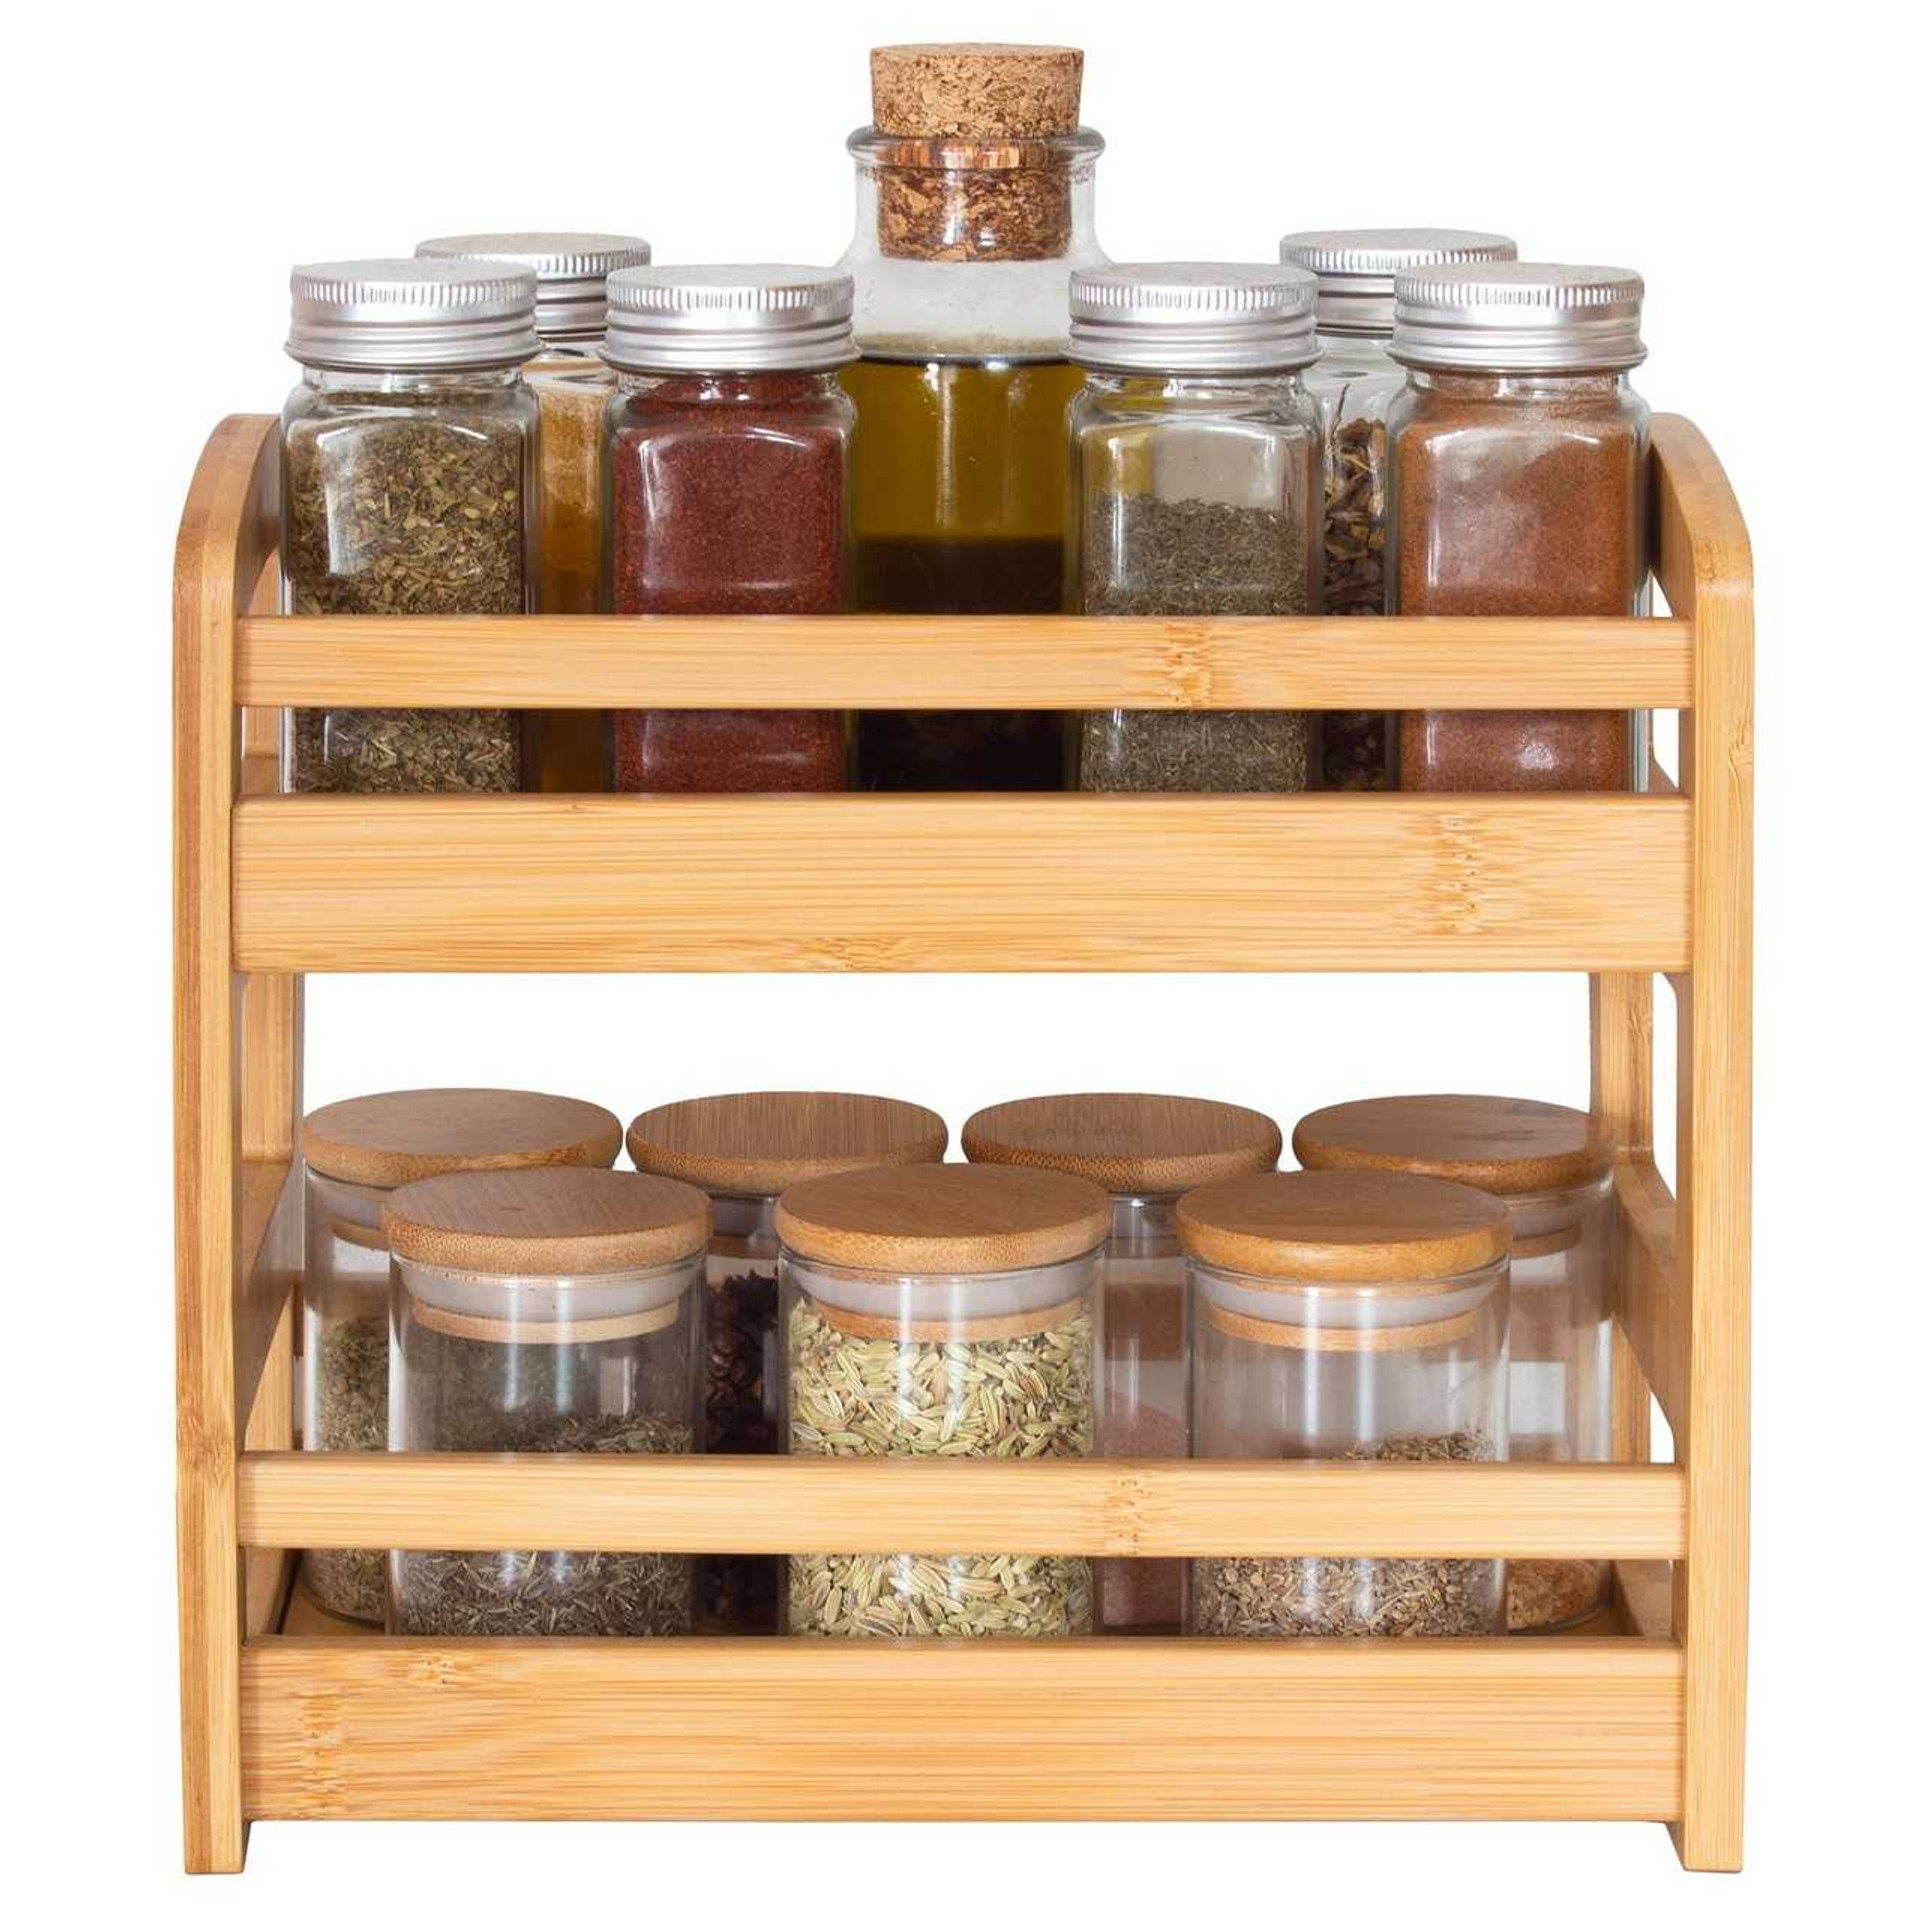 Two Tier Spice Caddy Exclusive at the Nut House